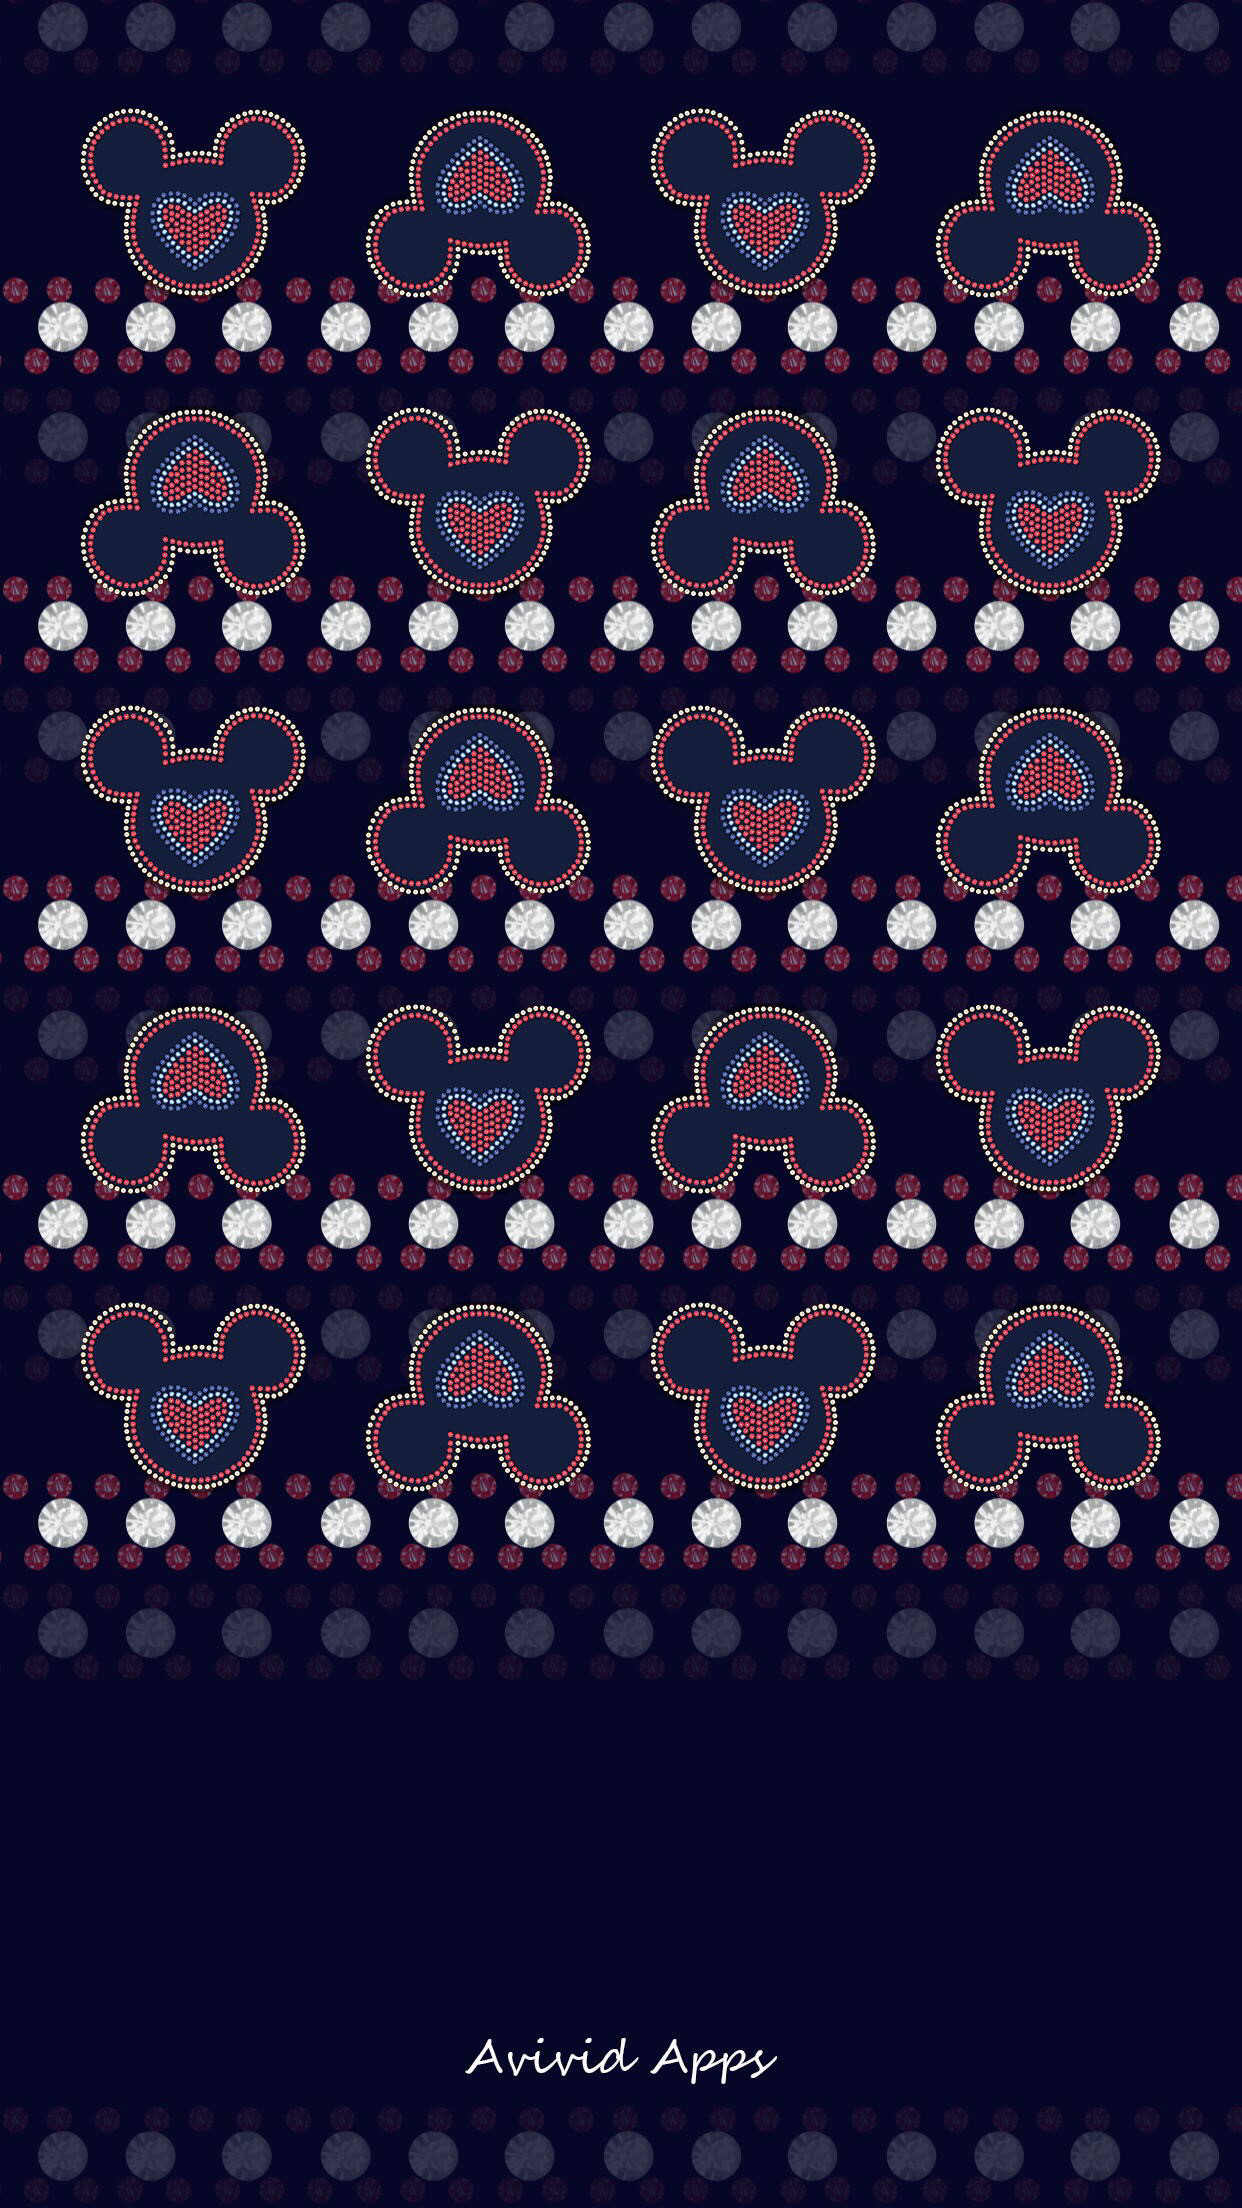 1242x2208 Iphone 6, Phone Wallpapers, Disney Inspired, Minnie Mouse, Hello Kitty,  Walls, Nails, Prints, Funds